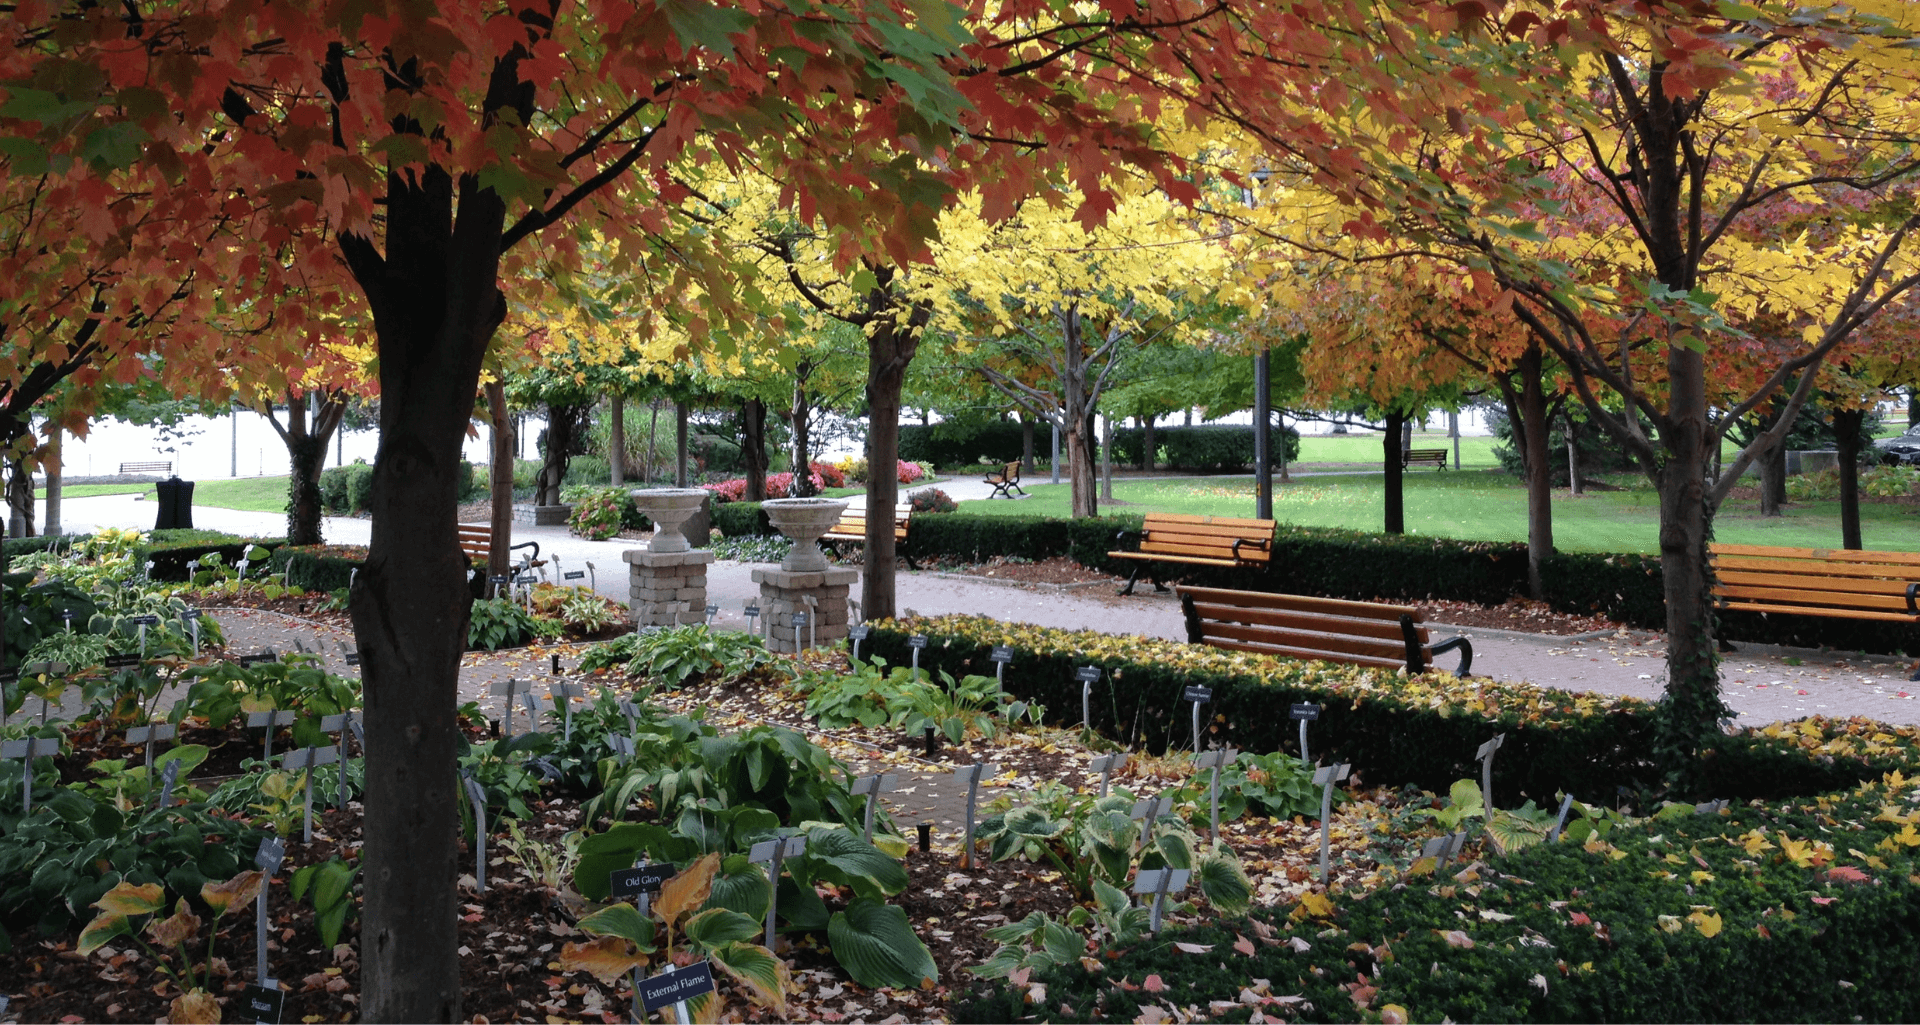 King's Navy Yard Park in the Fall.